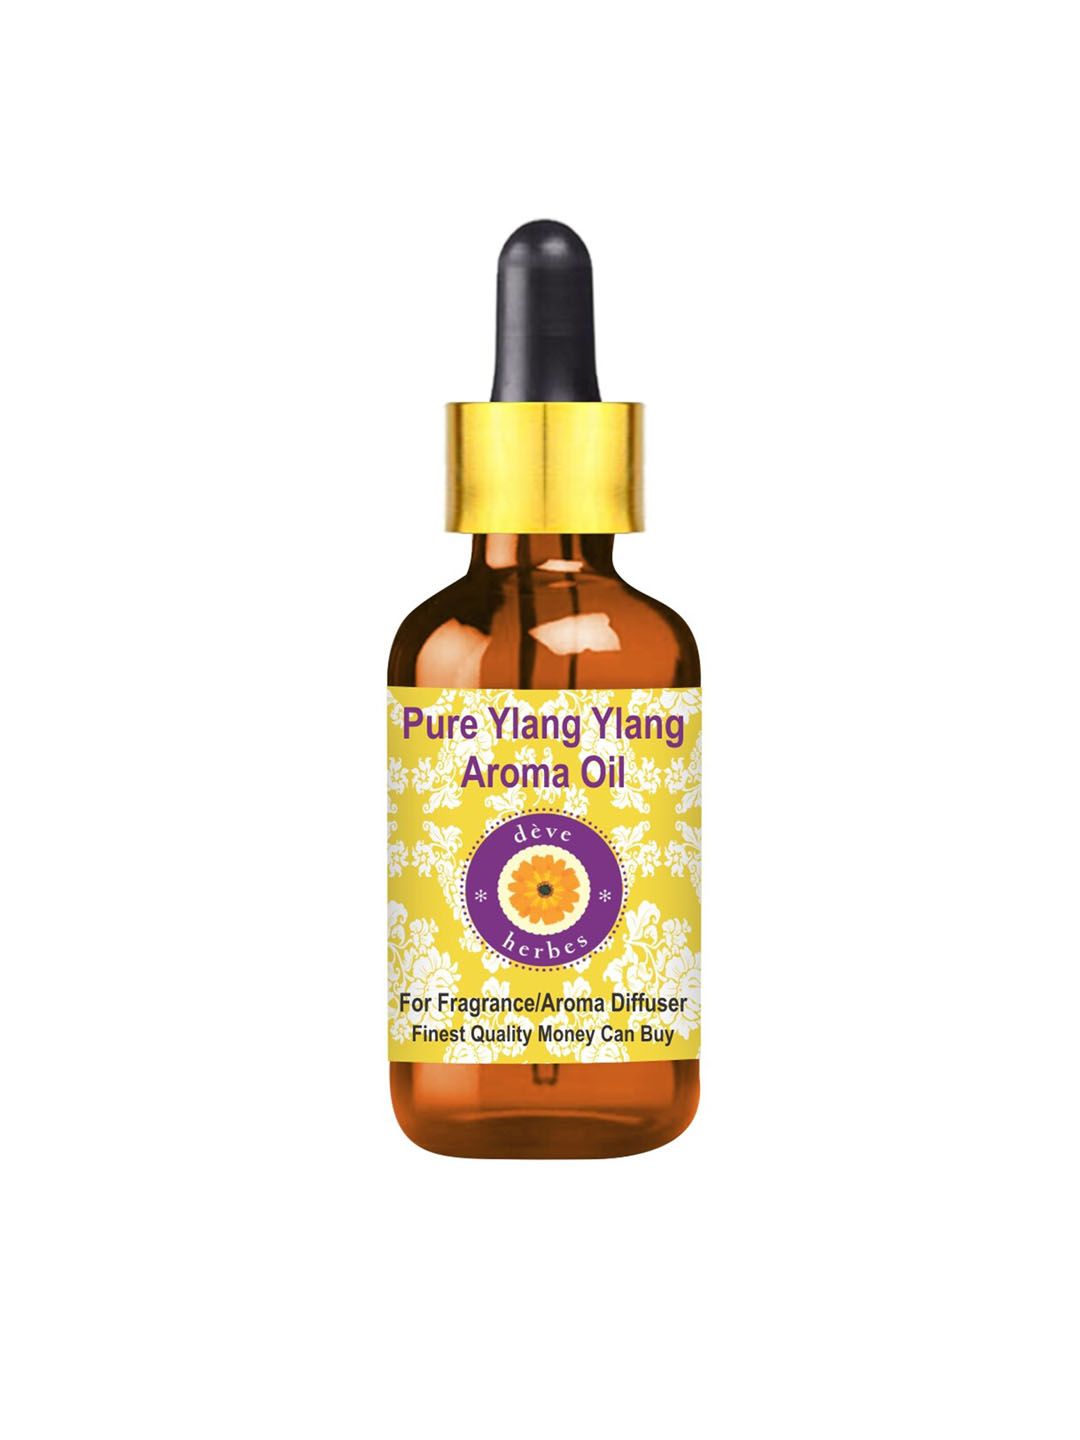 Deve Herbes Pure Ylang Ylang Aroma Oil 15ml Price in India